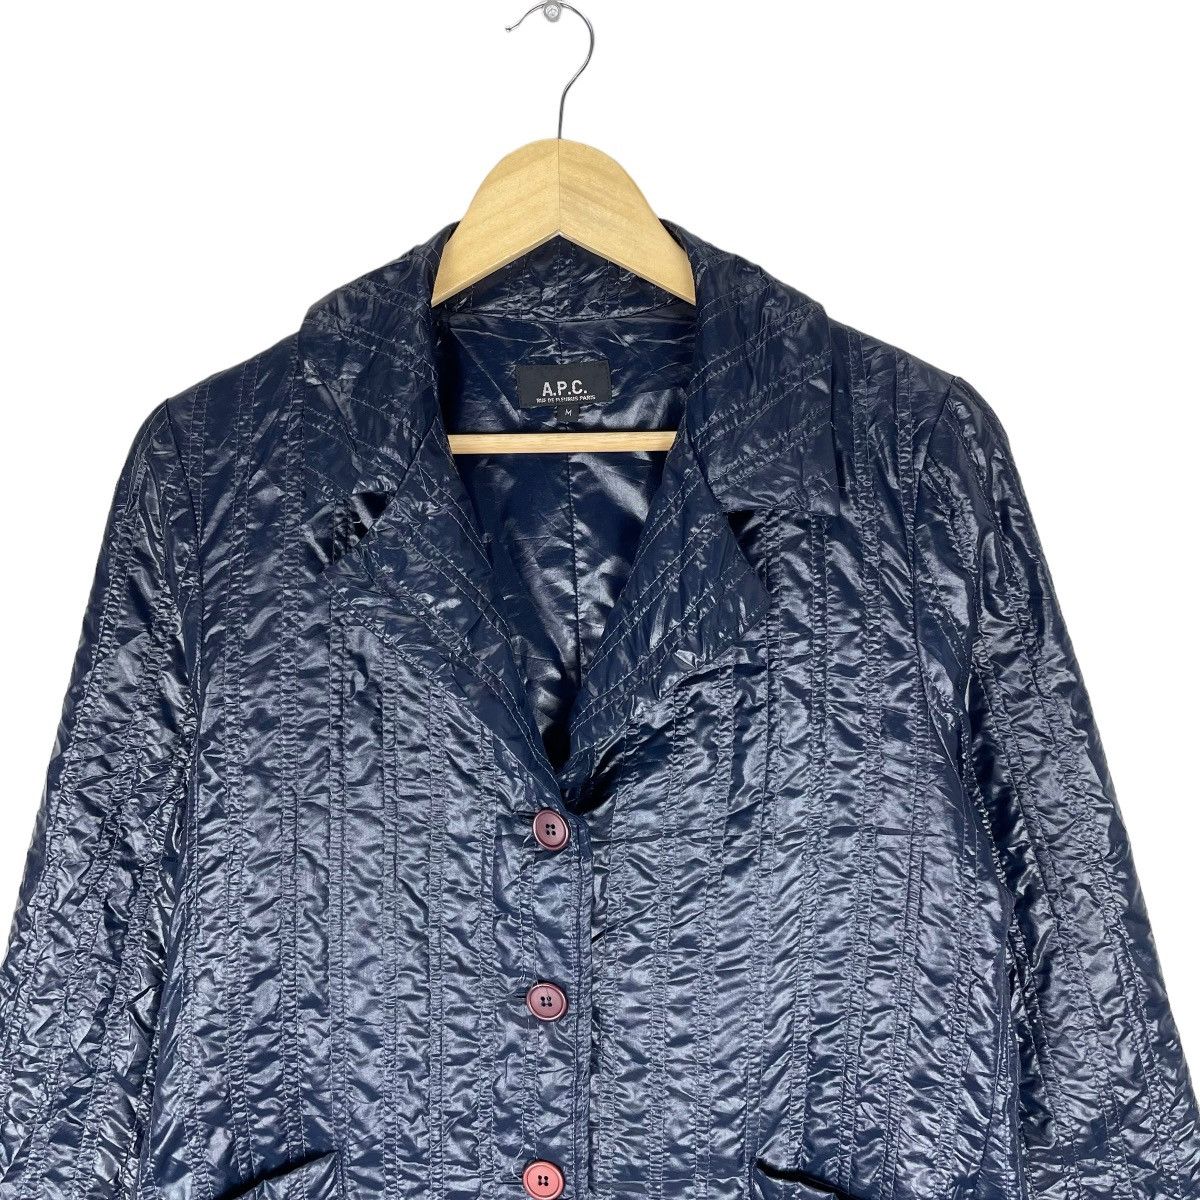 ❄️A.P.C FRANCE QUILTED BUTTON JACKET - 2